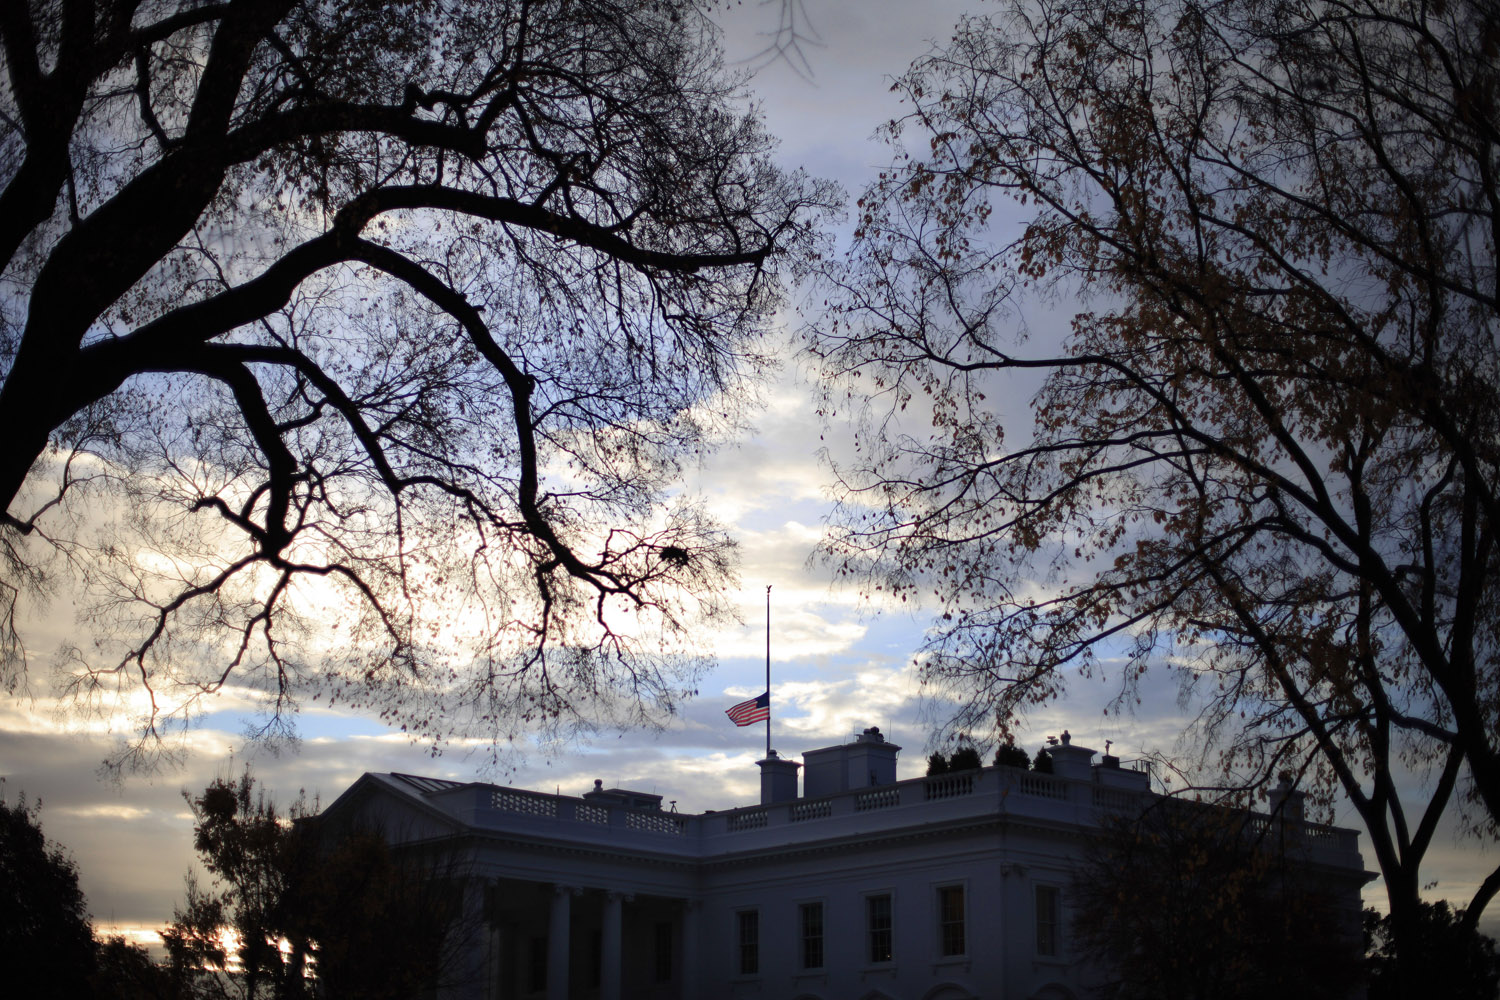 Nov. 22, 2013. A flag flies at half-staff above the White House in Washington, early Friday morning,  President Barack Obama ordered that flags be lowered at government buildings to mark the 50th anniversary of President John F. Kennedy's assassination.